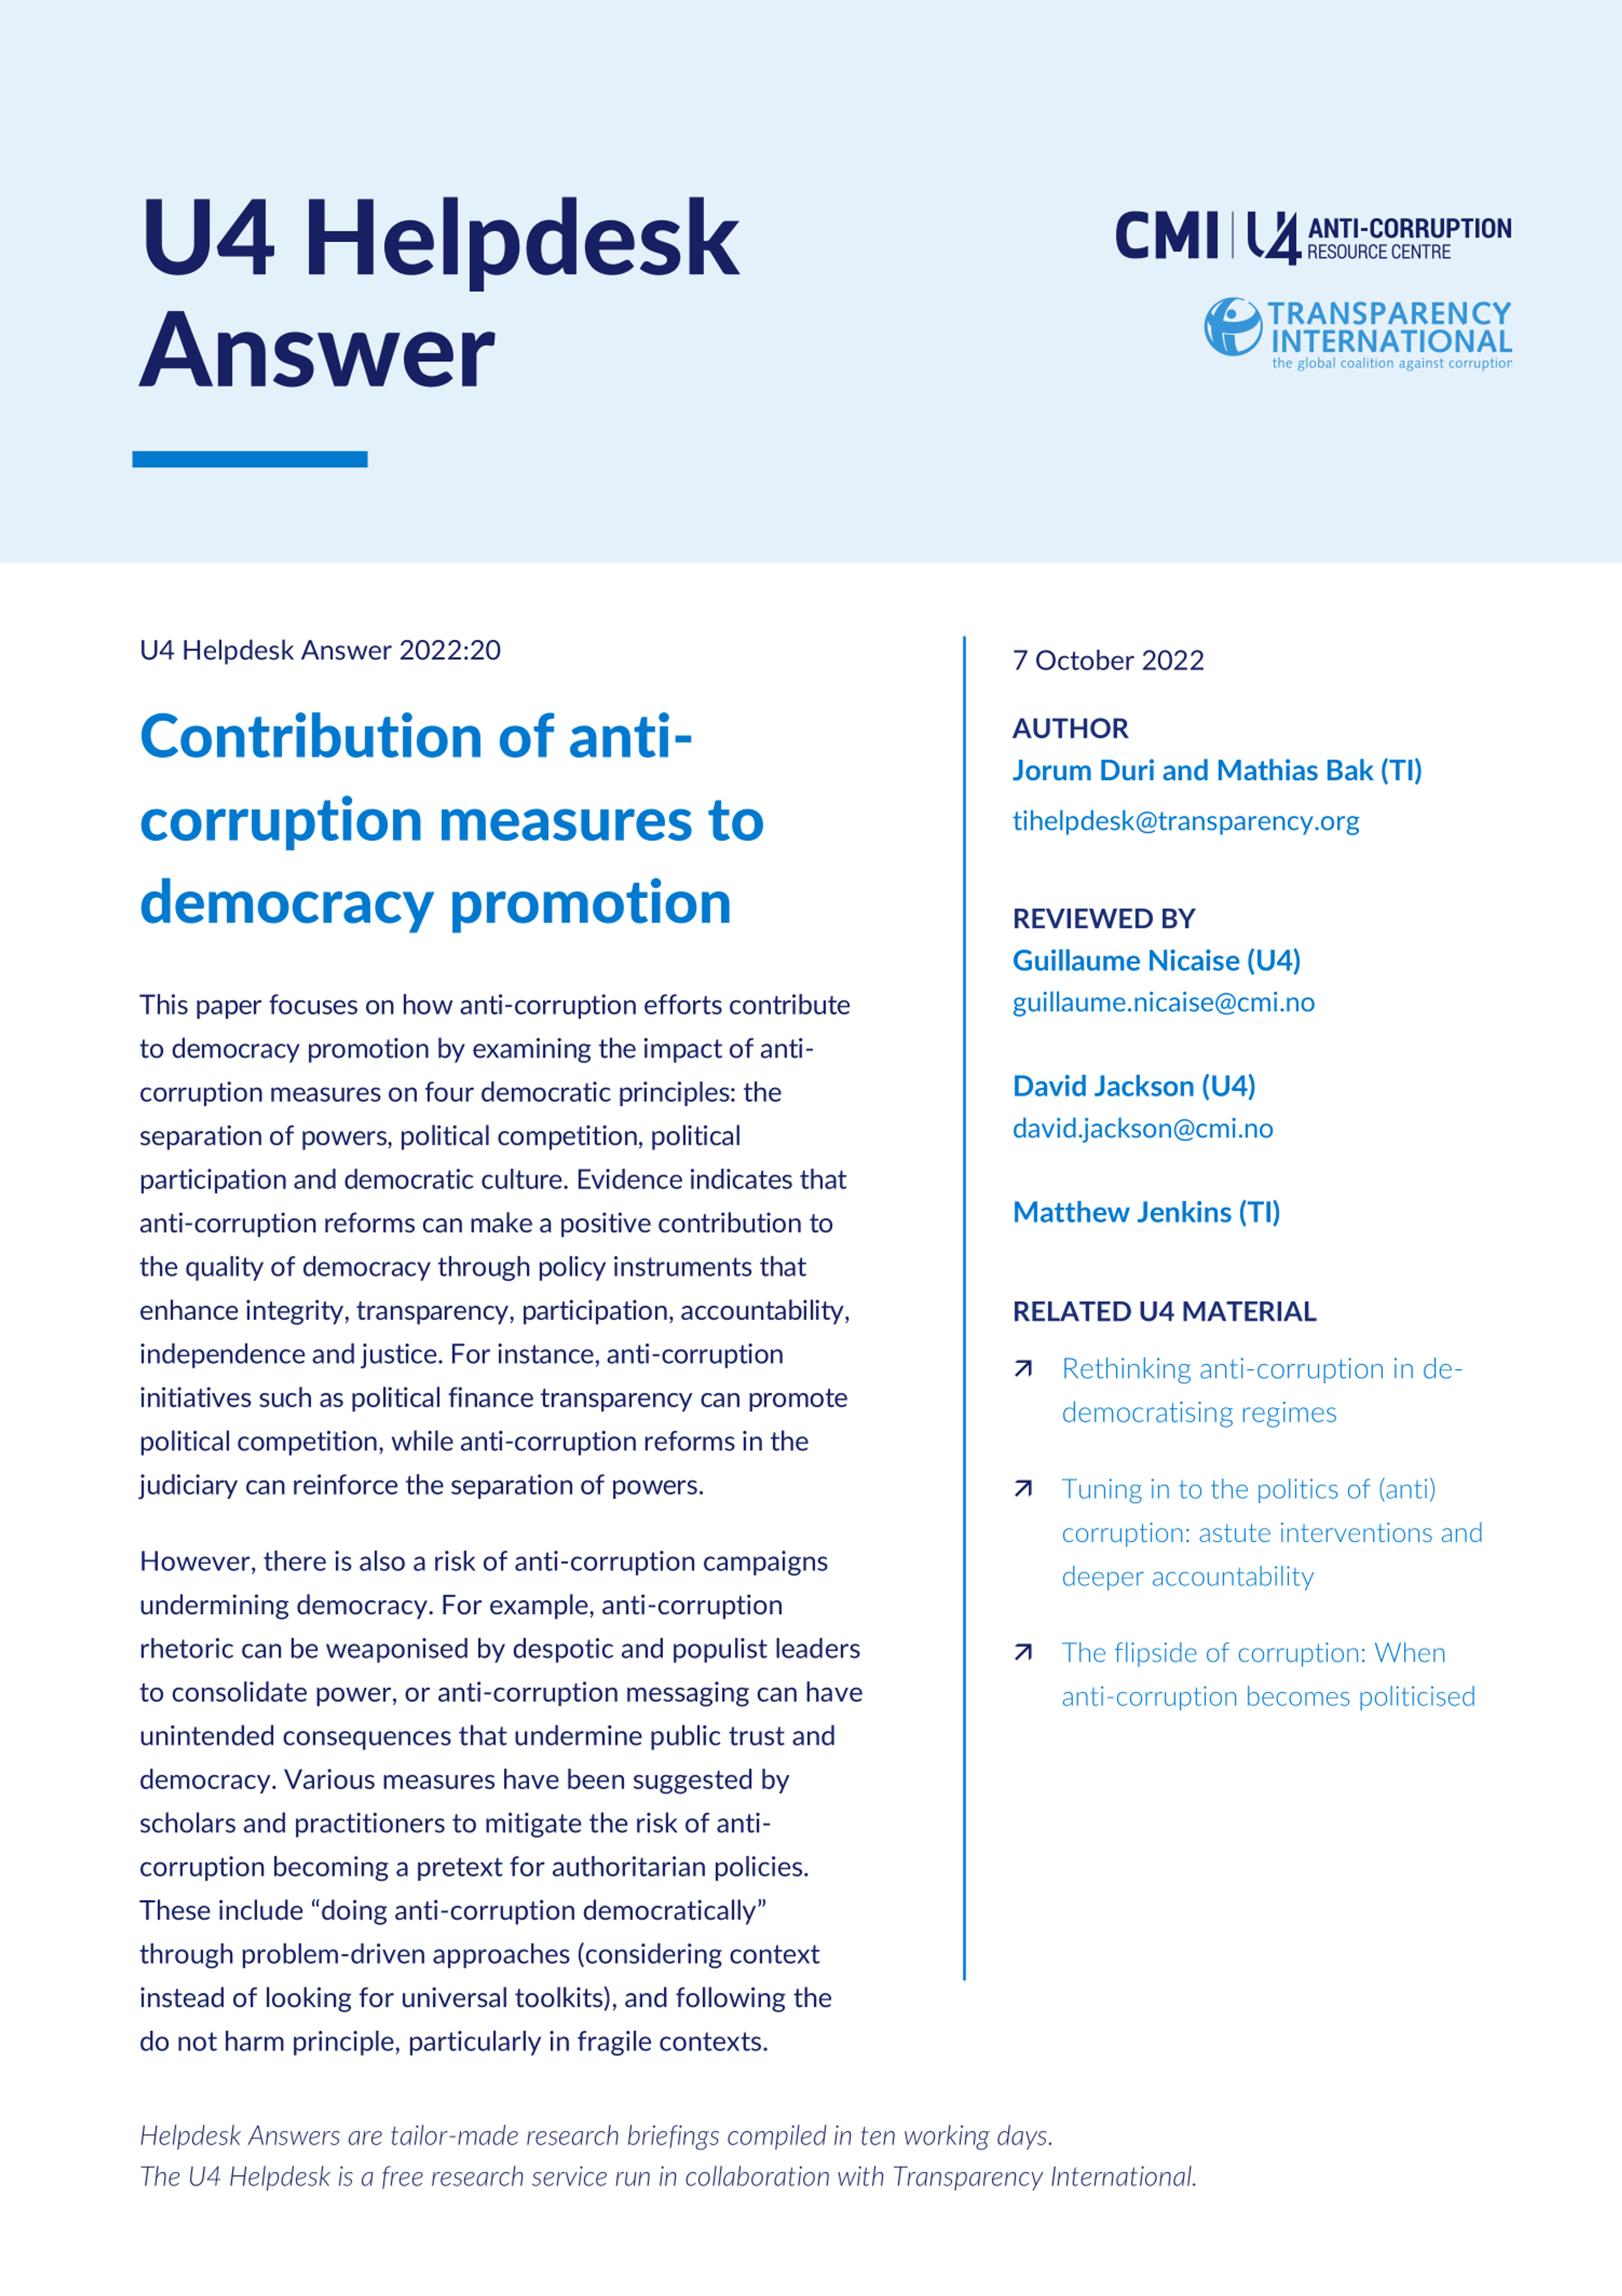 Contribution of anti-corruption measures to democracy promotion